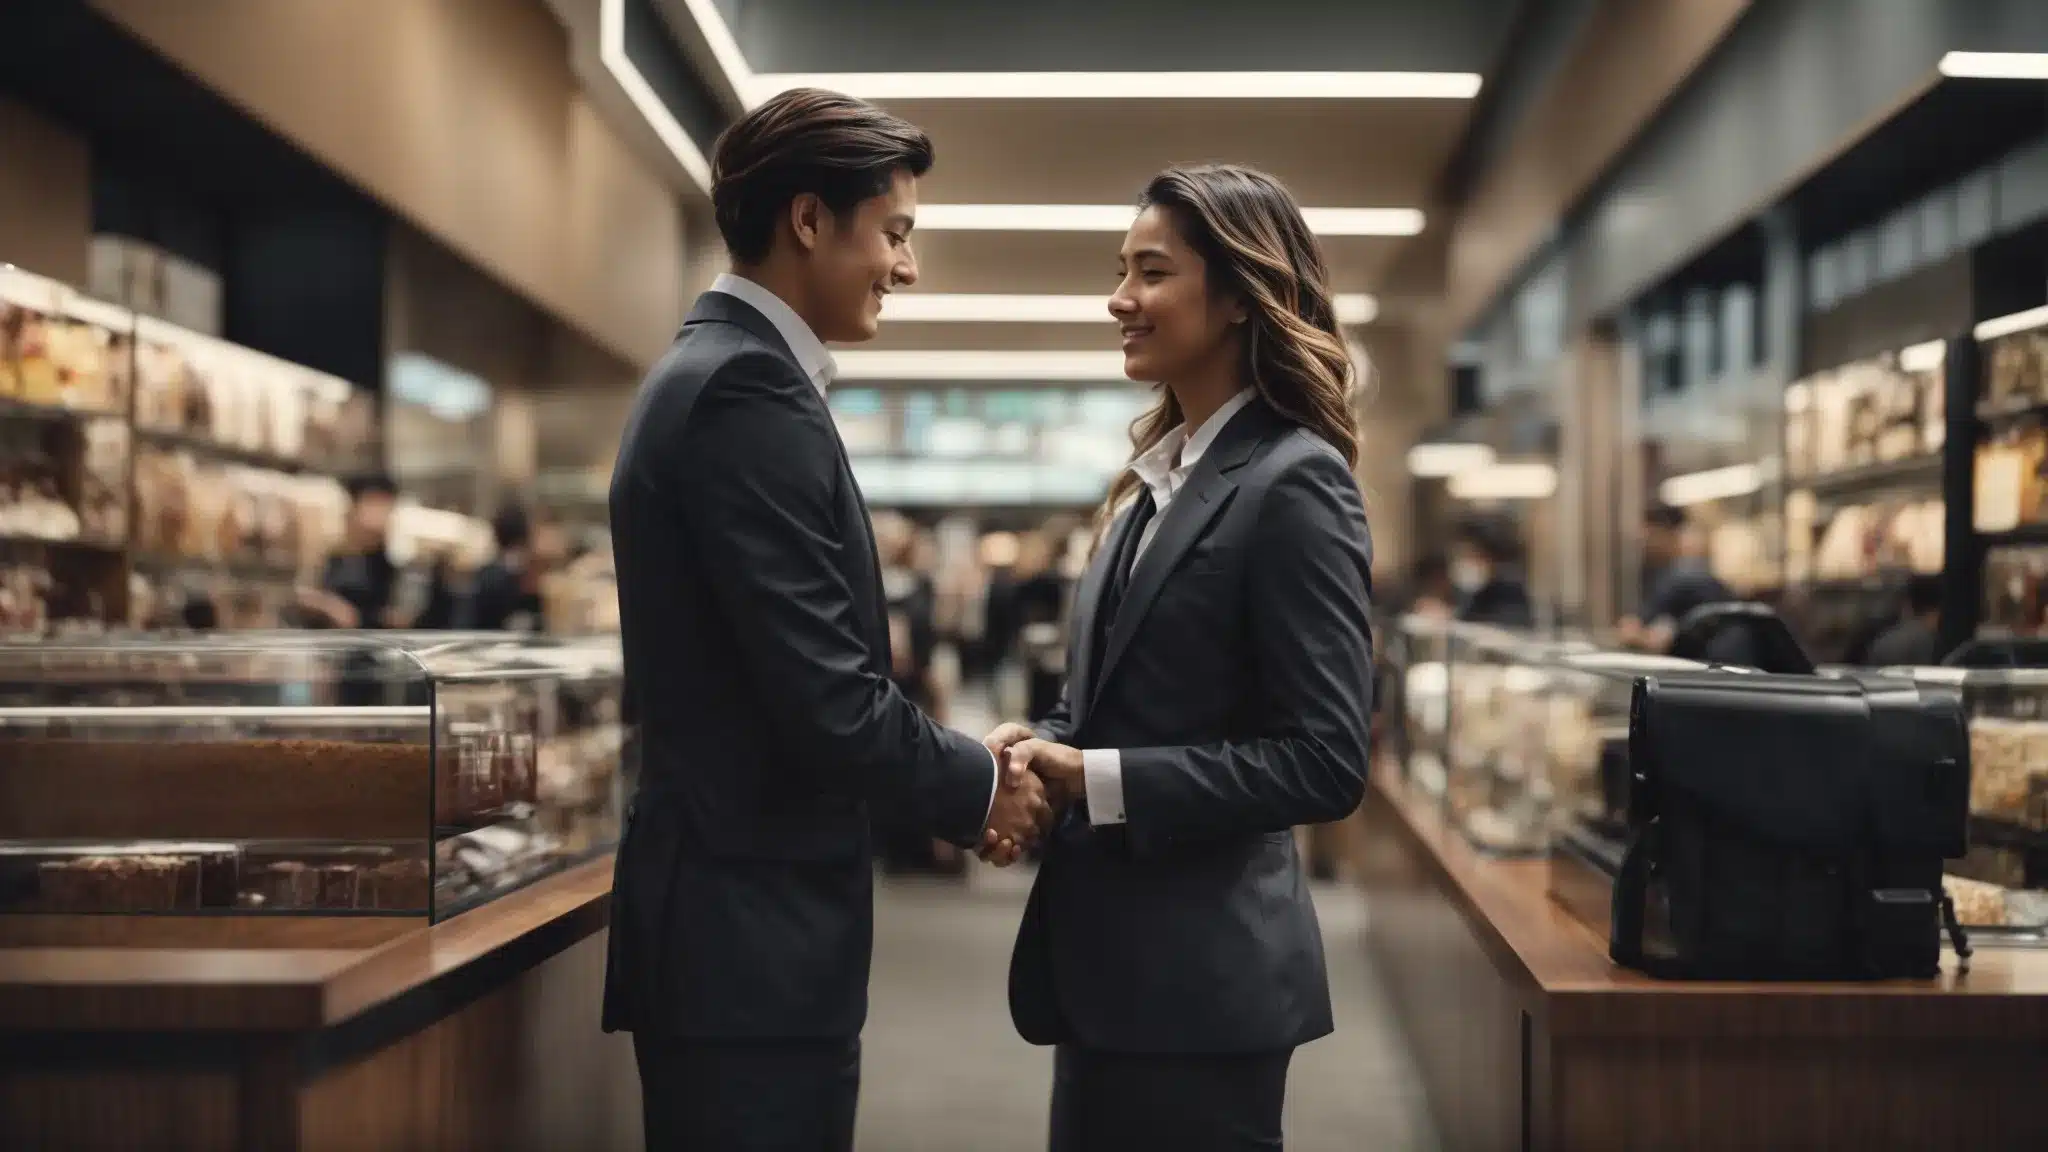 A Businessperson Shaking Hands With A Satisfied Client Against The Backdrop Of A Bustling Retail Store.